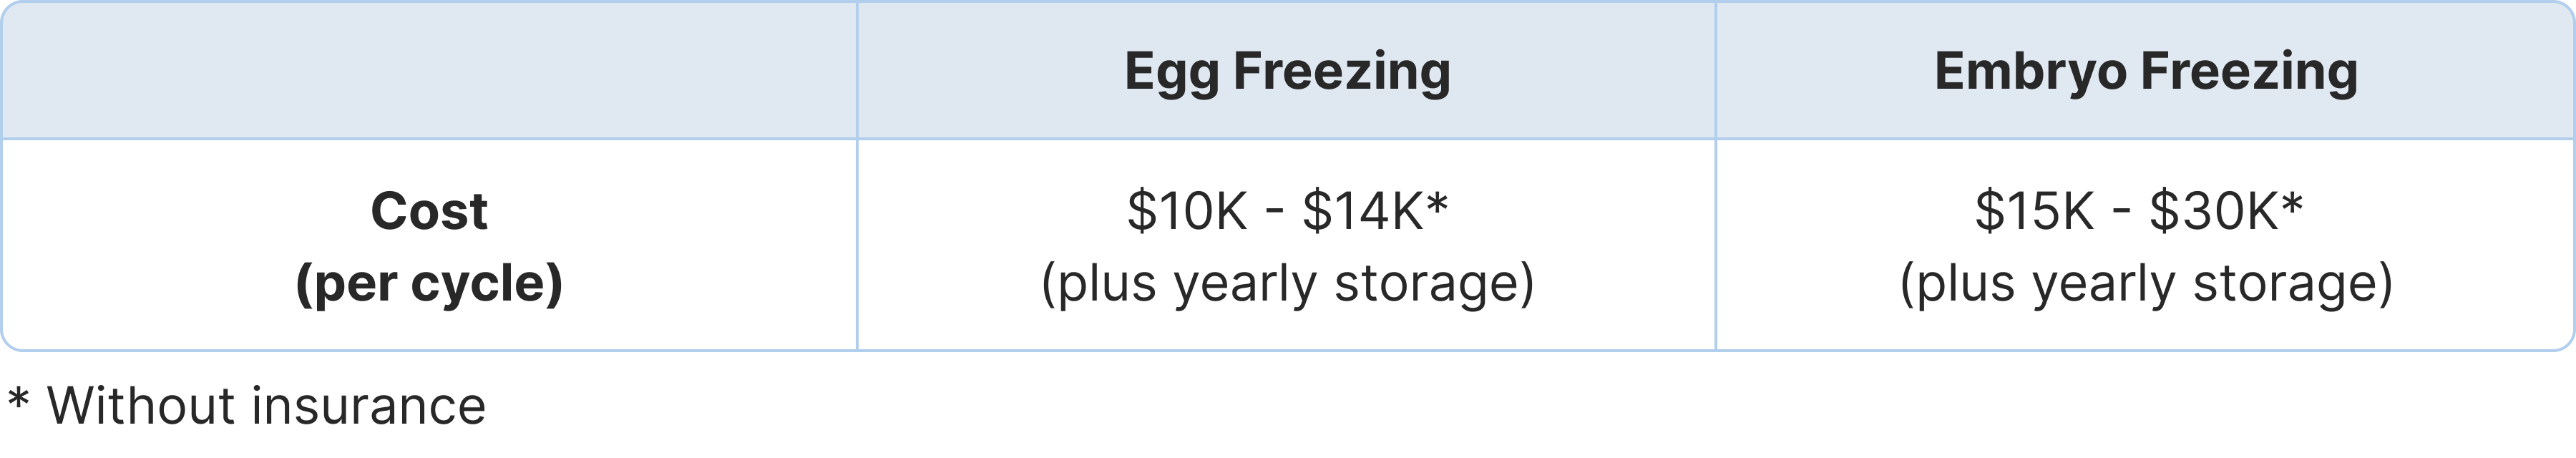 Cost per cycle for egg freezing vs. embryo freezing